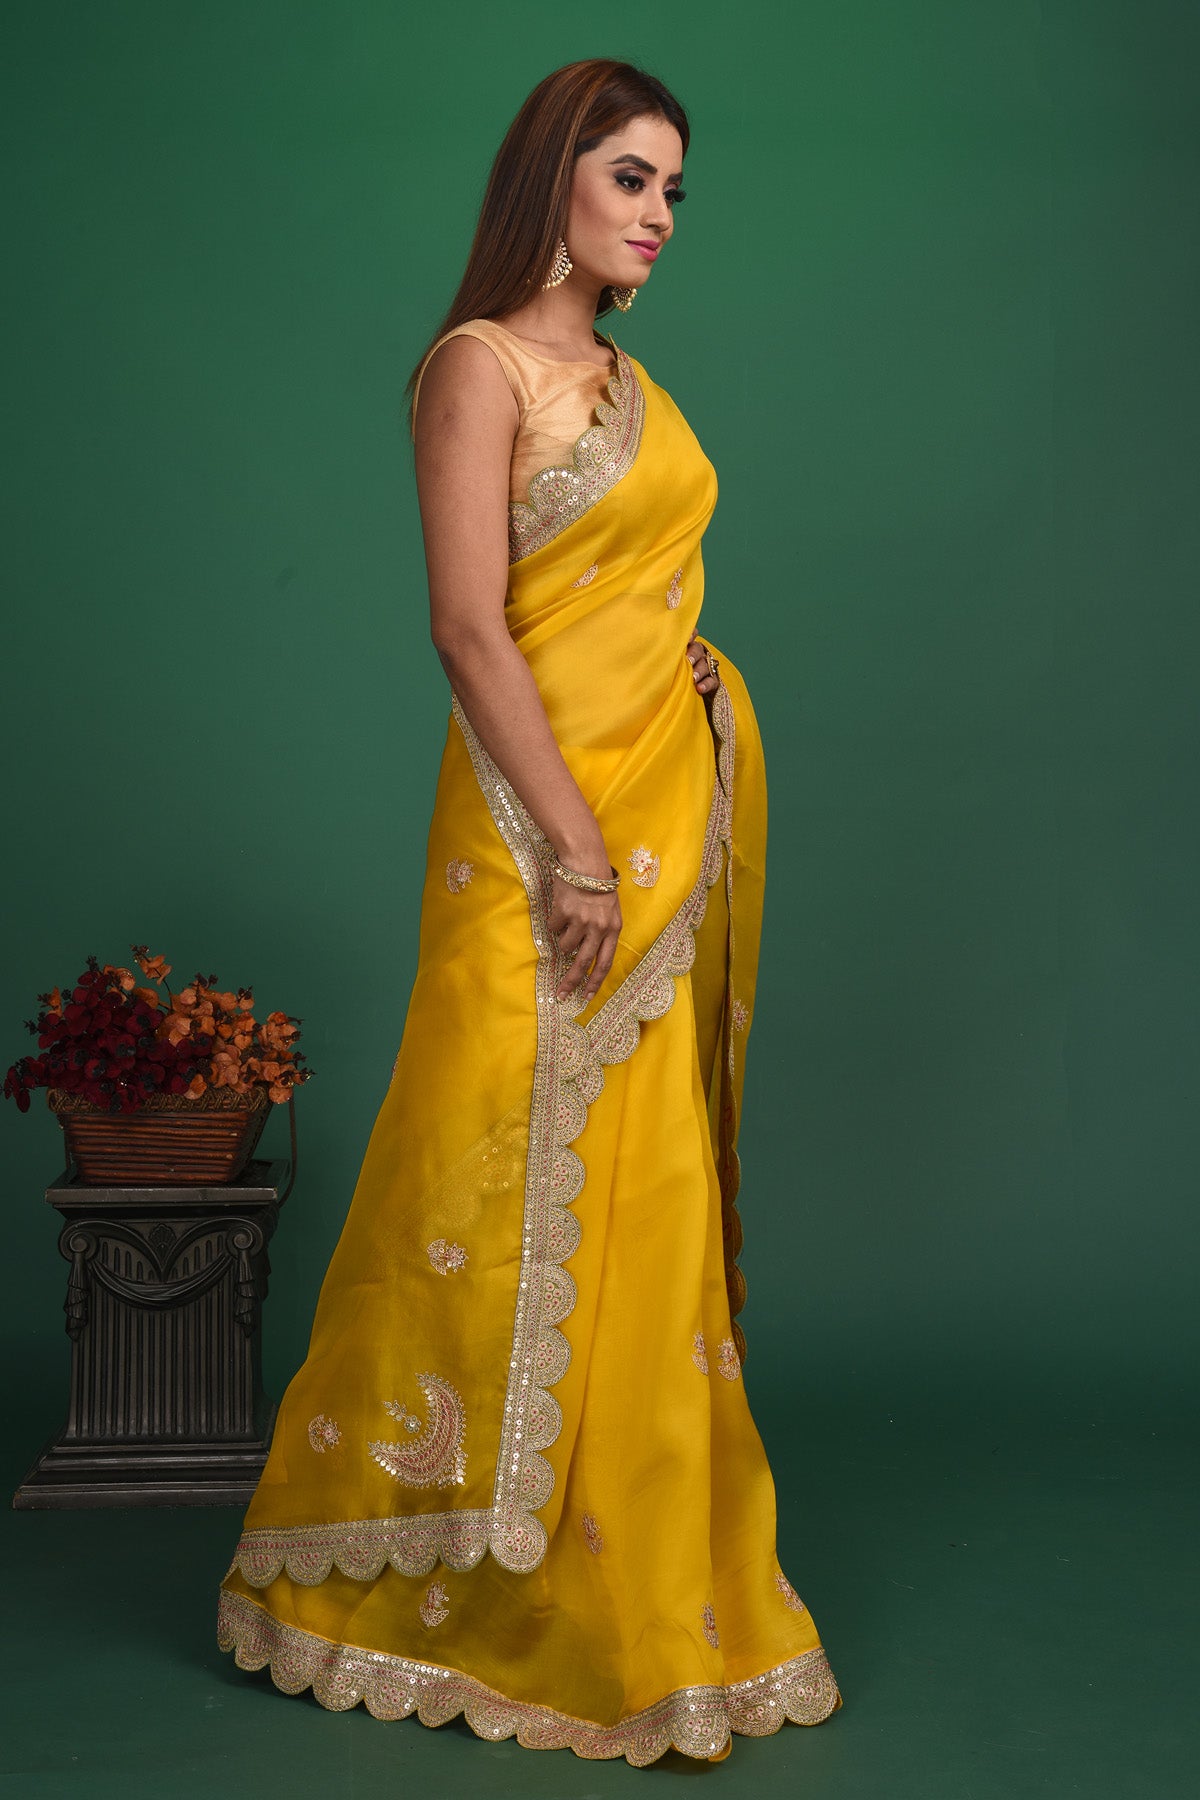 Buy stunning mango yellow embroidered organza saree online in USA. Be a vision of style and elegance at parties and special occasions in beautiful designer sarees, embroidered sarees, printed sarees, satin saris from Pure Elegance Indian fashion store in USA.-side